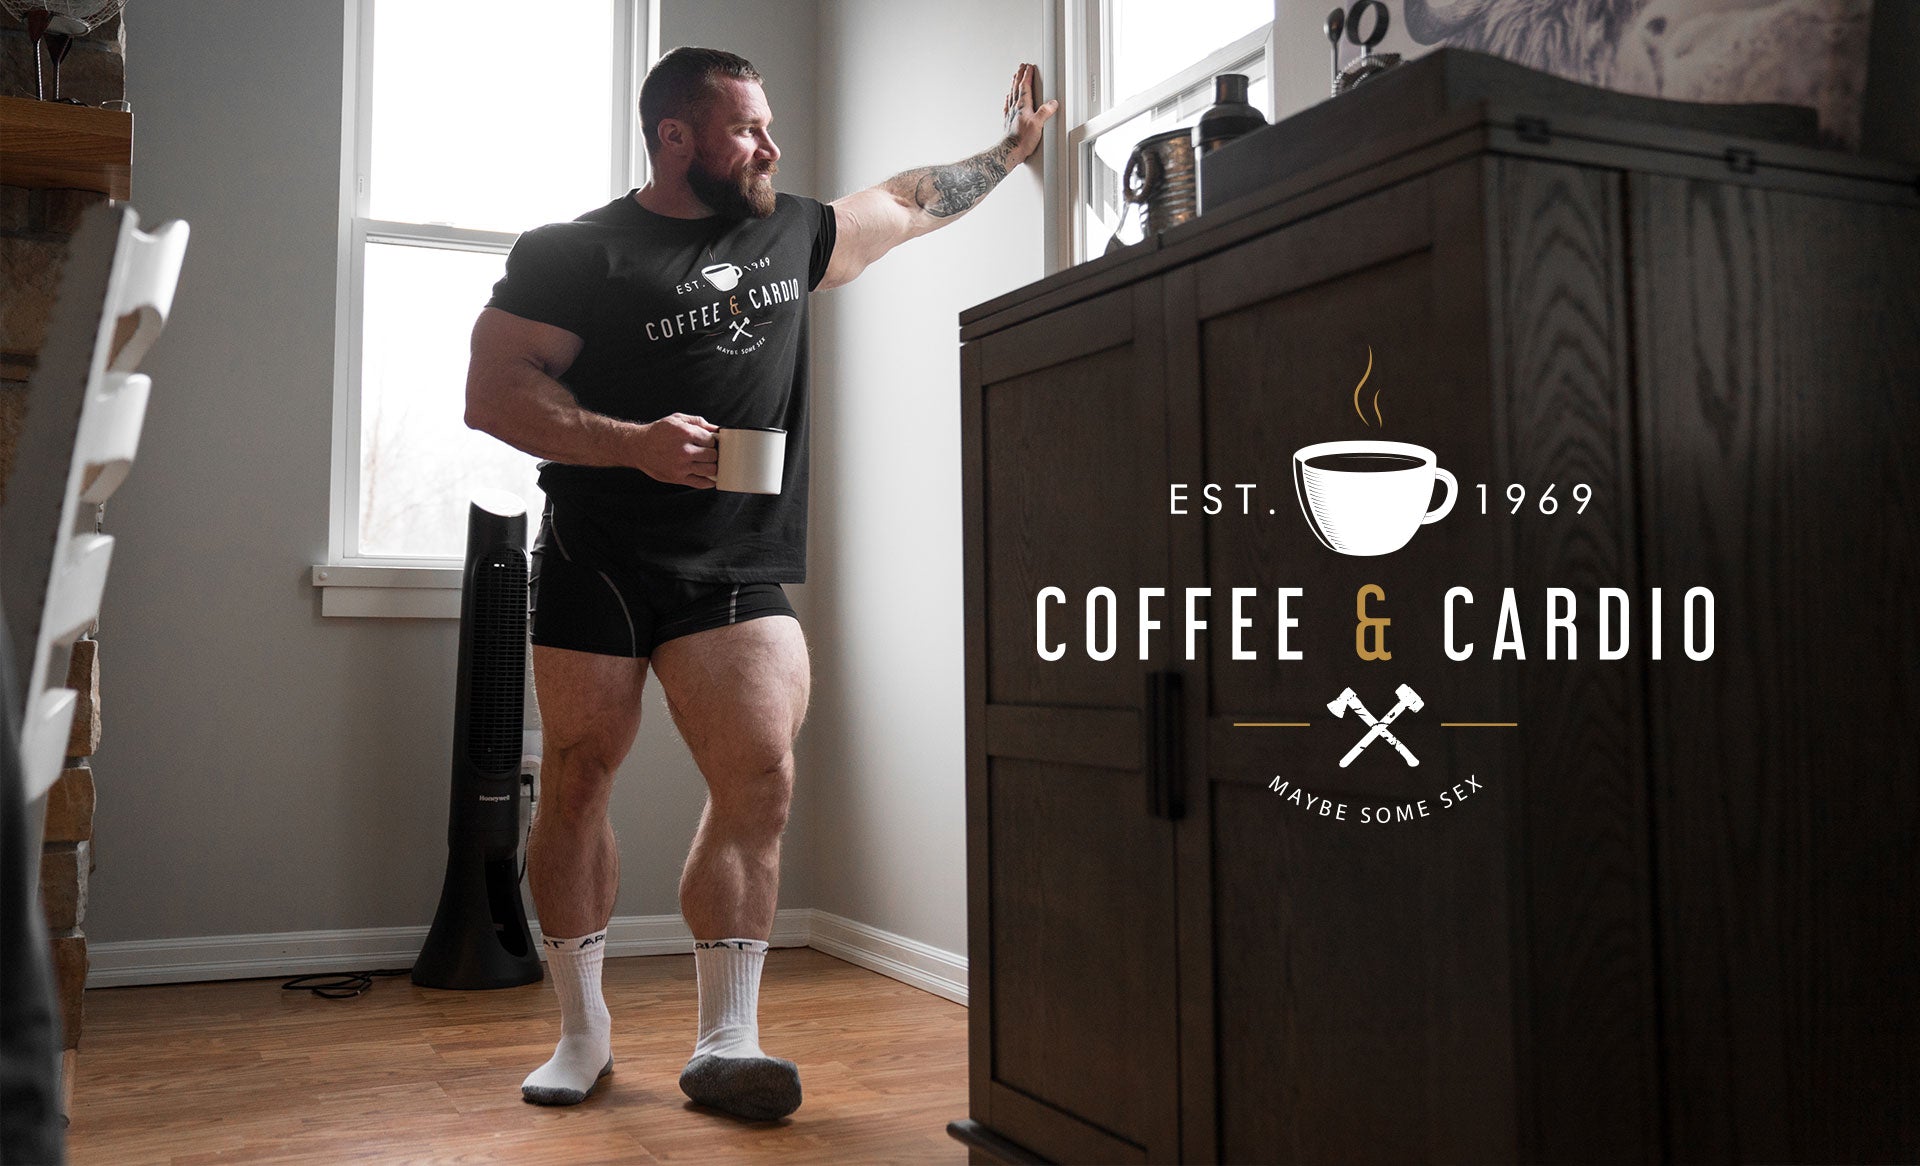 Coffee & Cardio, Maybe some Sex